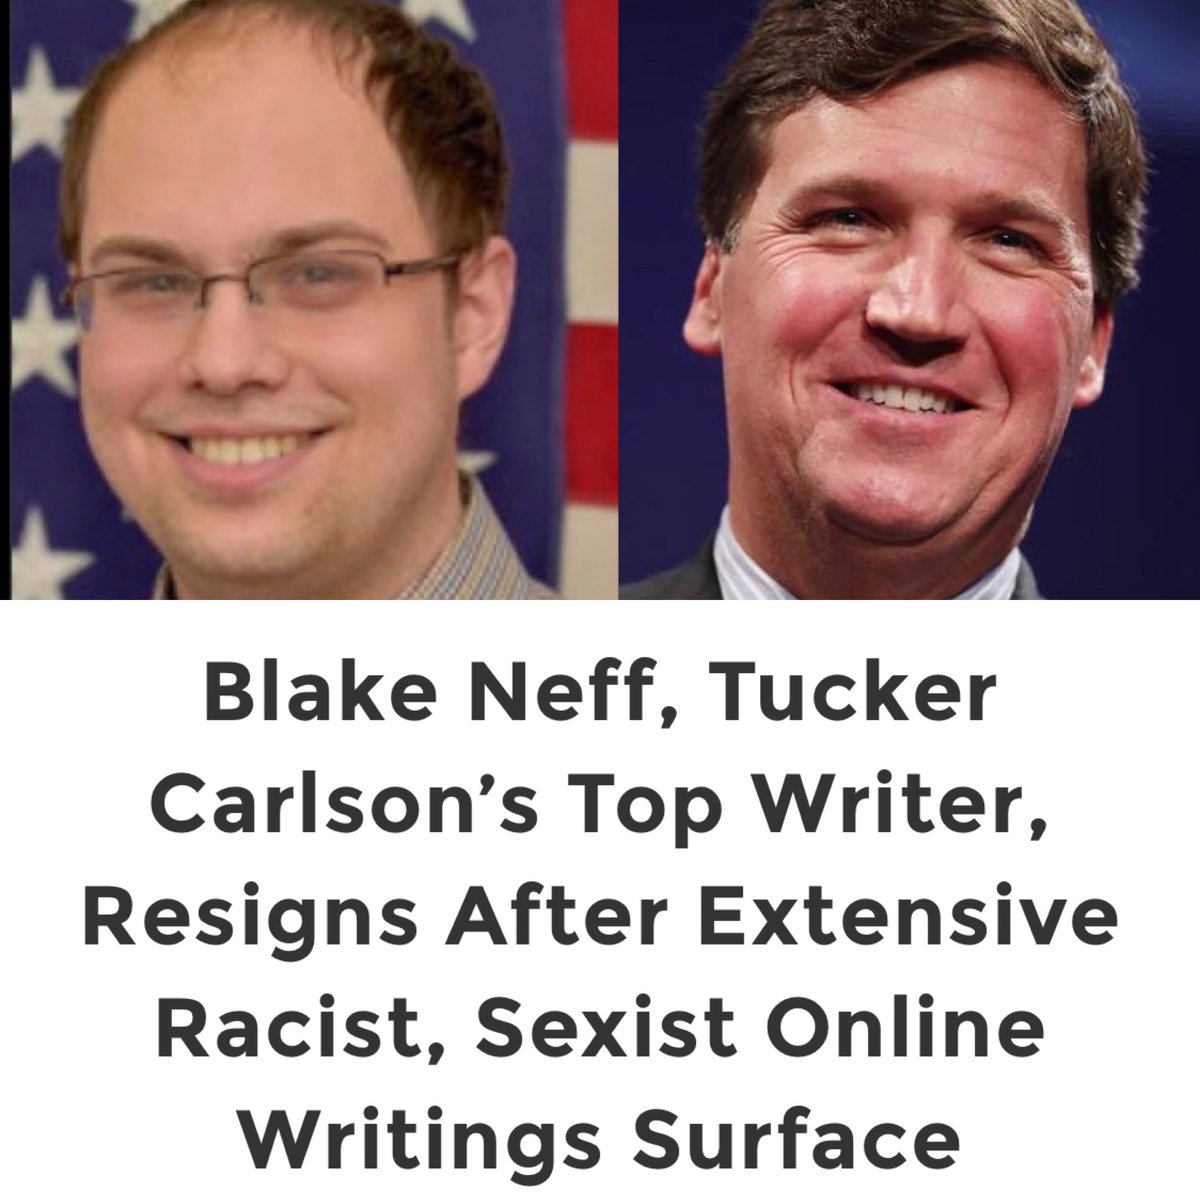 So just to be crystal clear:  @TuckerCarlson's program, the highest-rated show in the history of cable news, was primarily written by a racist incel named Blake Neff and naturally  @realDonaldTrump consistently endorsed it.